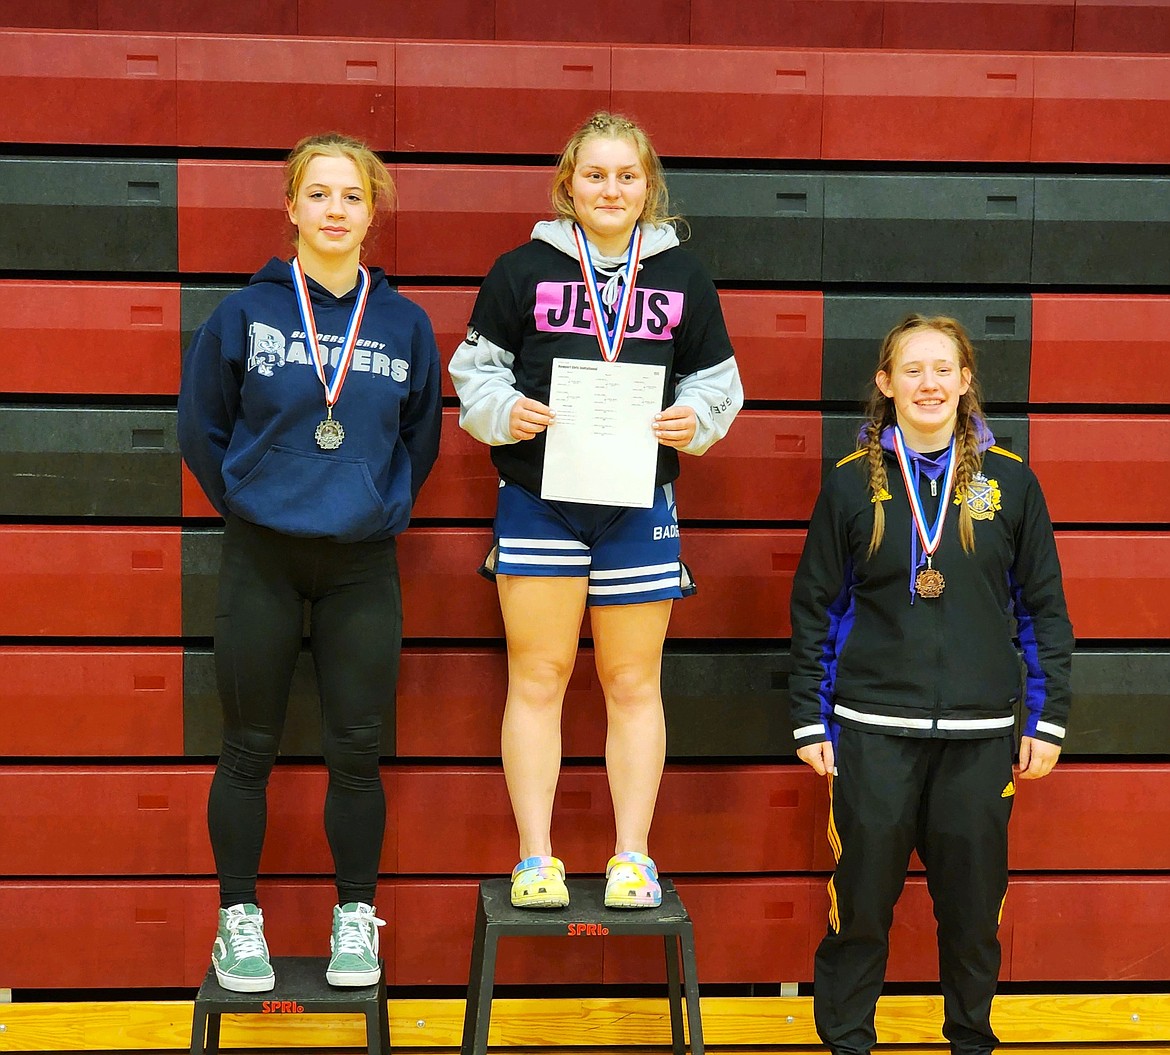 (left) Lindsey Onstott takes second and Savannah Rickter take first for the 155 weight class at the Newport Girls Invite on Jan. 14.